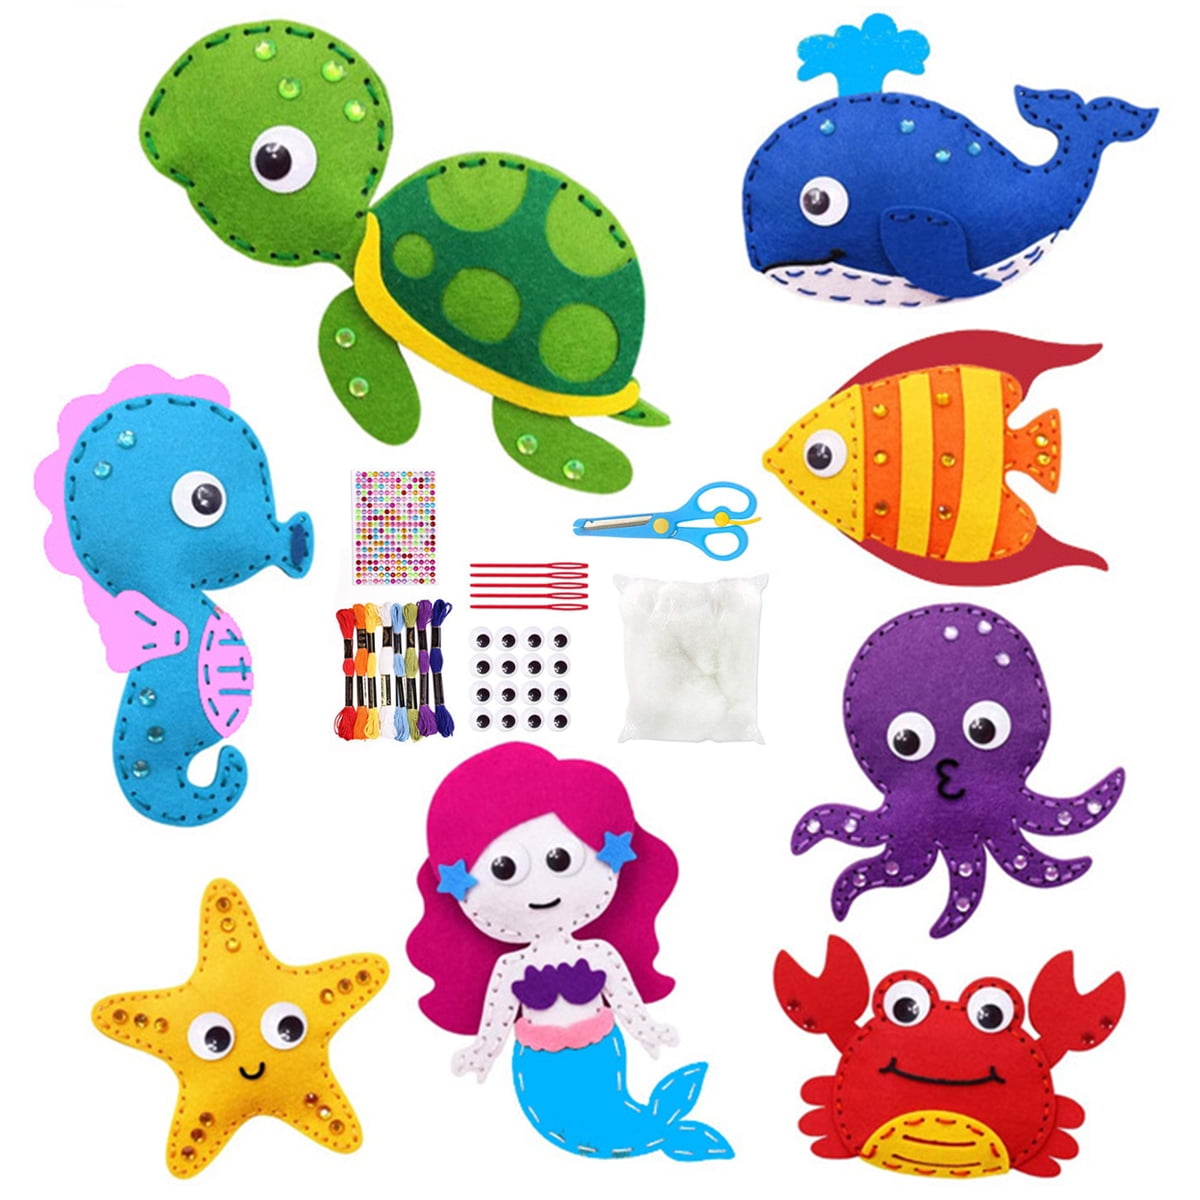 DIY Musical Rain Stick Kit for Kids, Sea Creatures , DIY Activity Kit, Kids  Coloring Sea Animals, Birthday Gifts for Kids -  Sweden